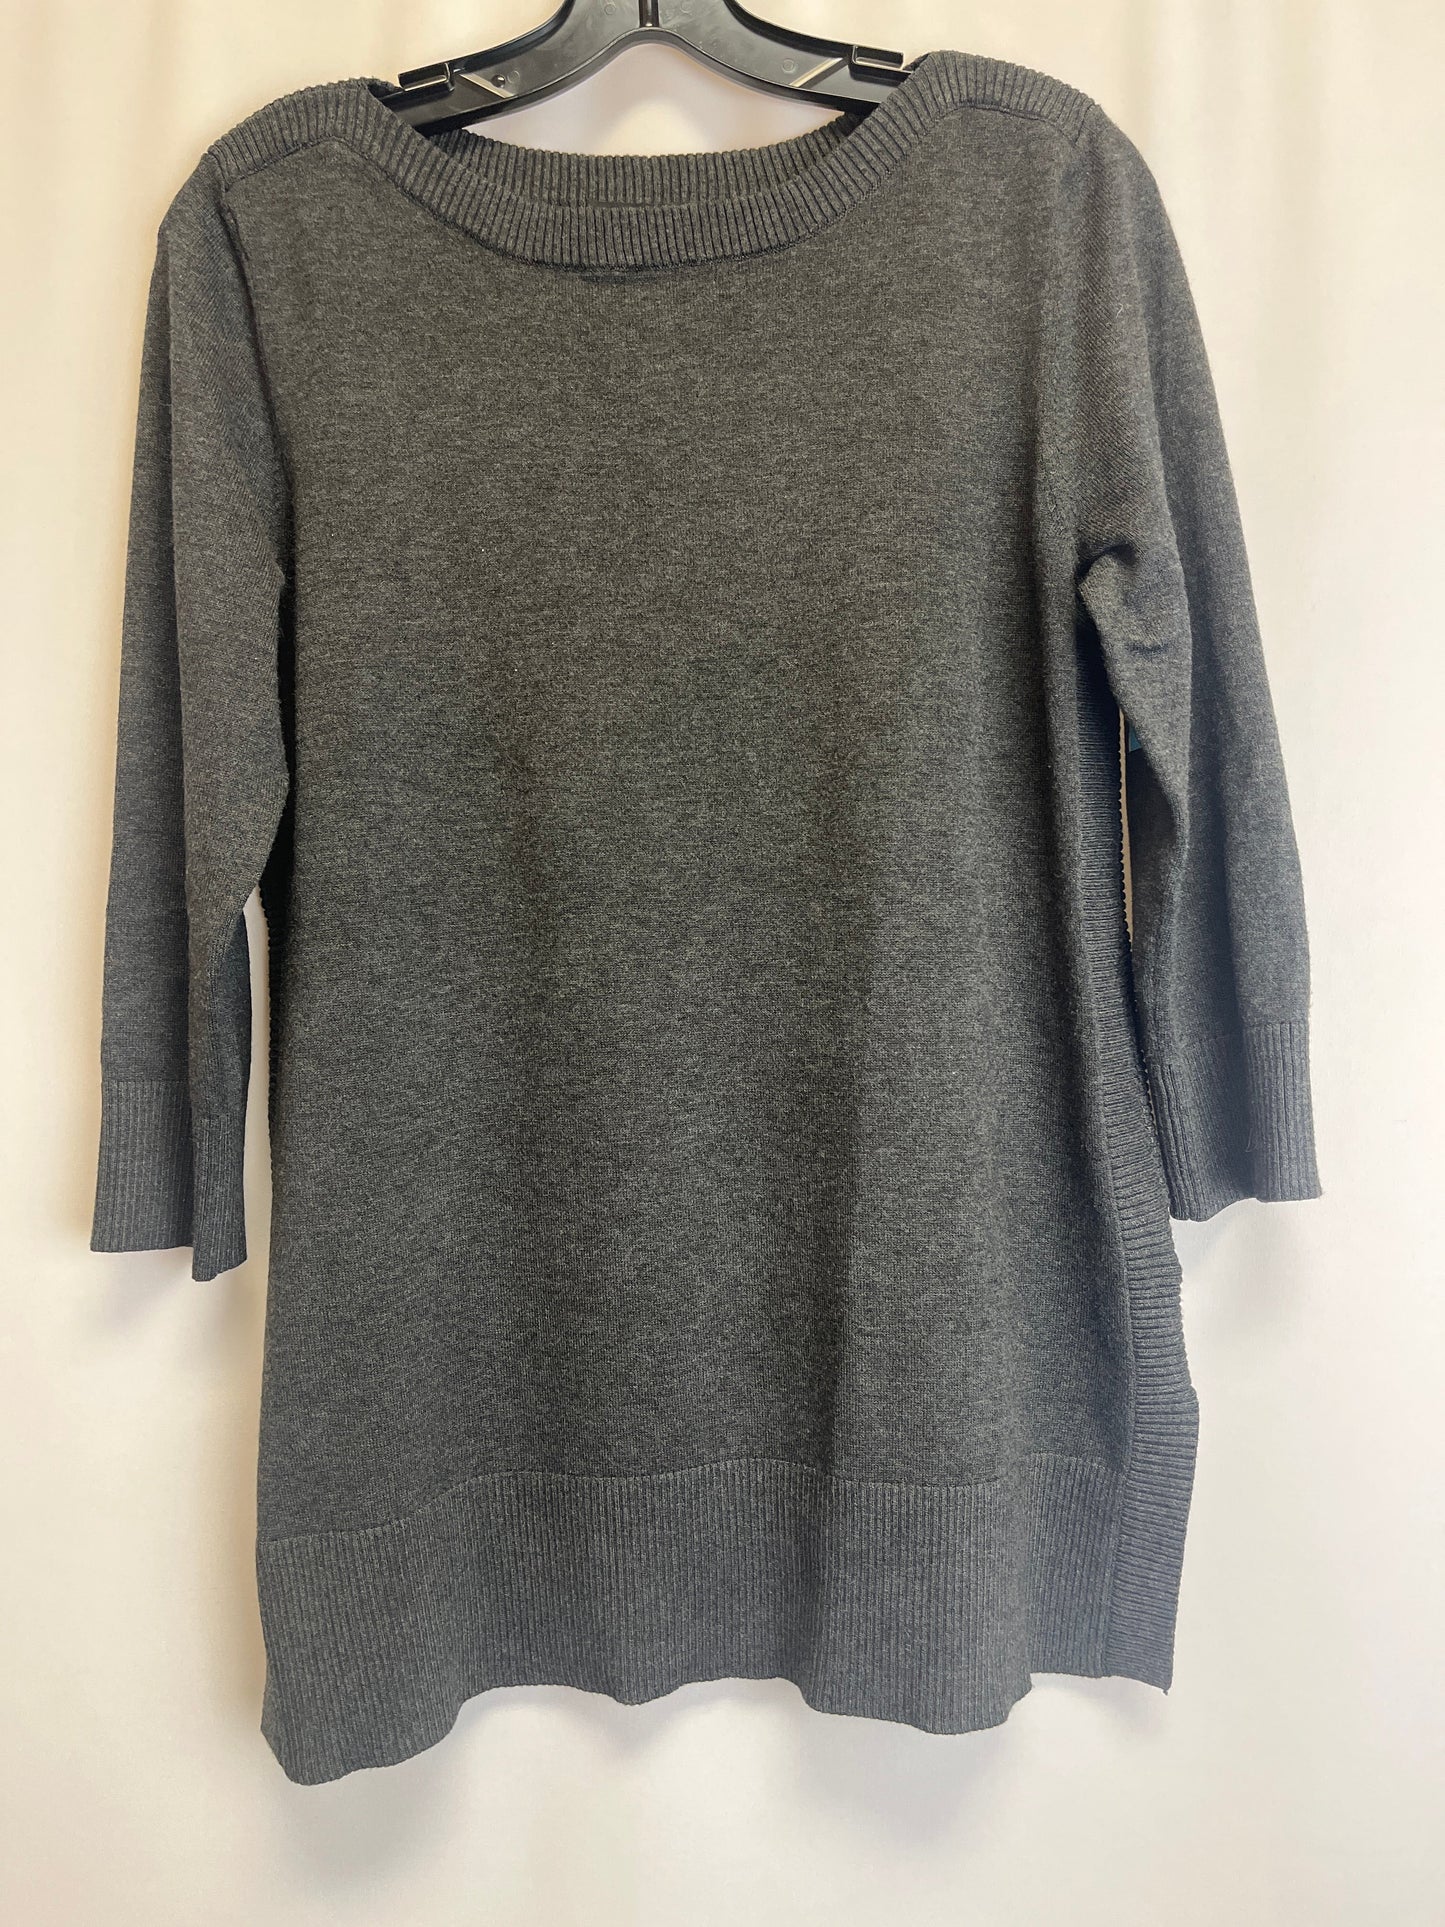 Sweater By Cable And Gauge  Size: M